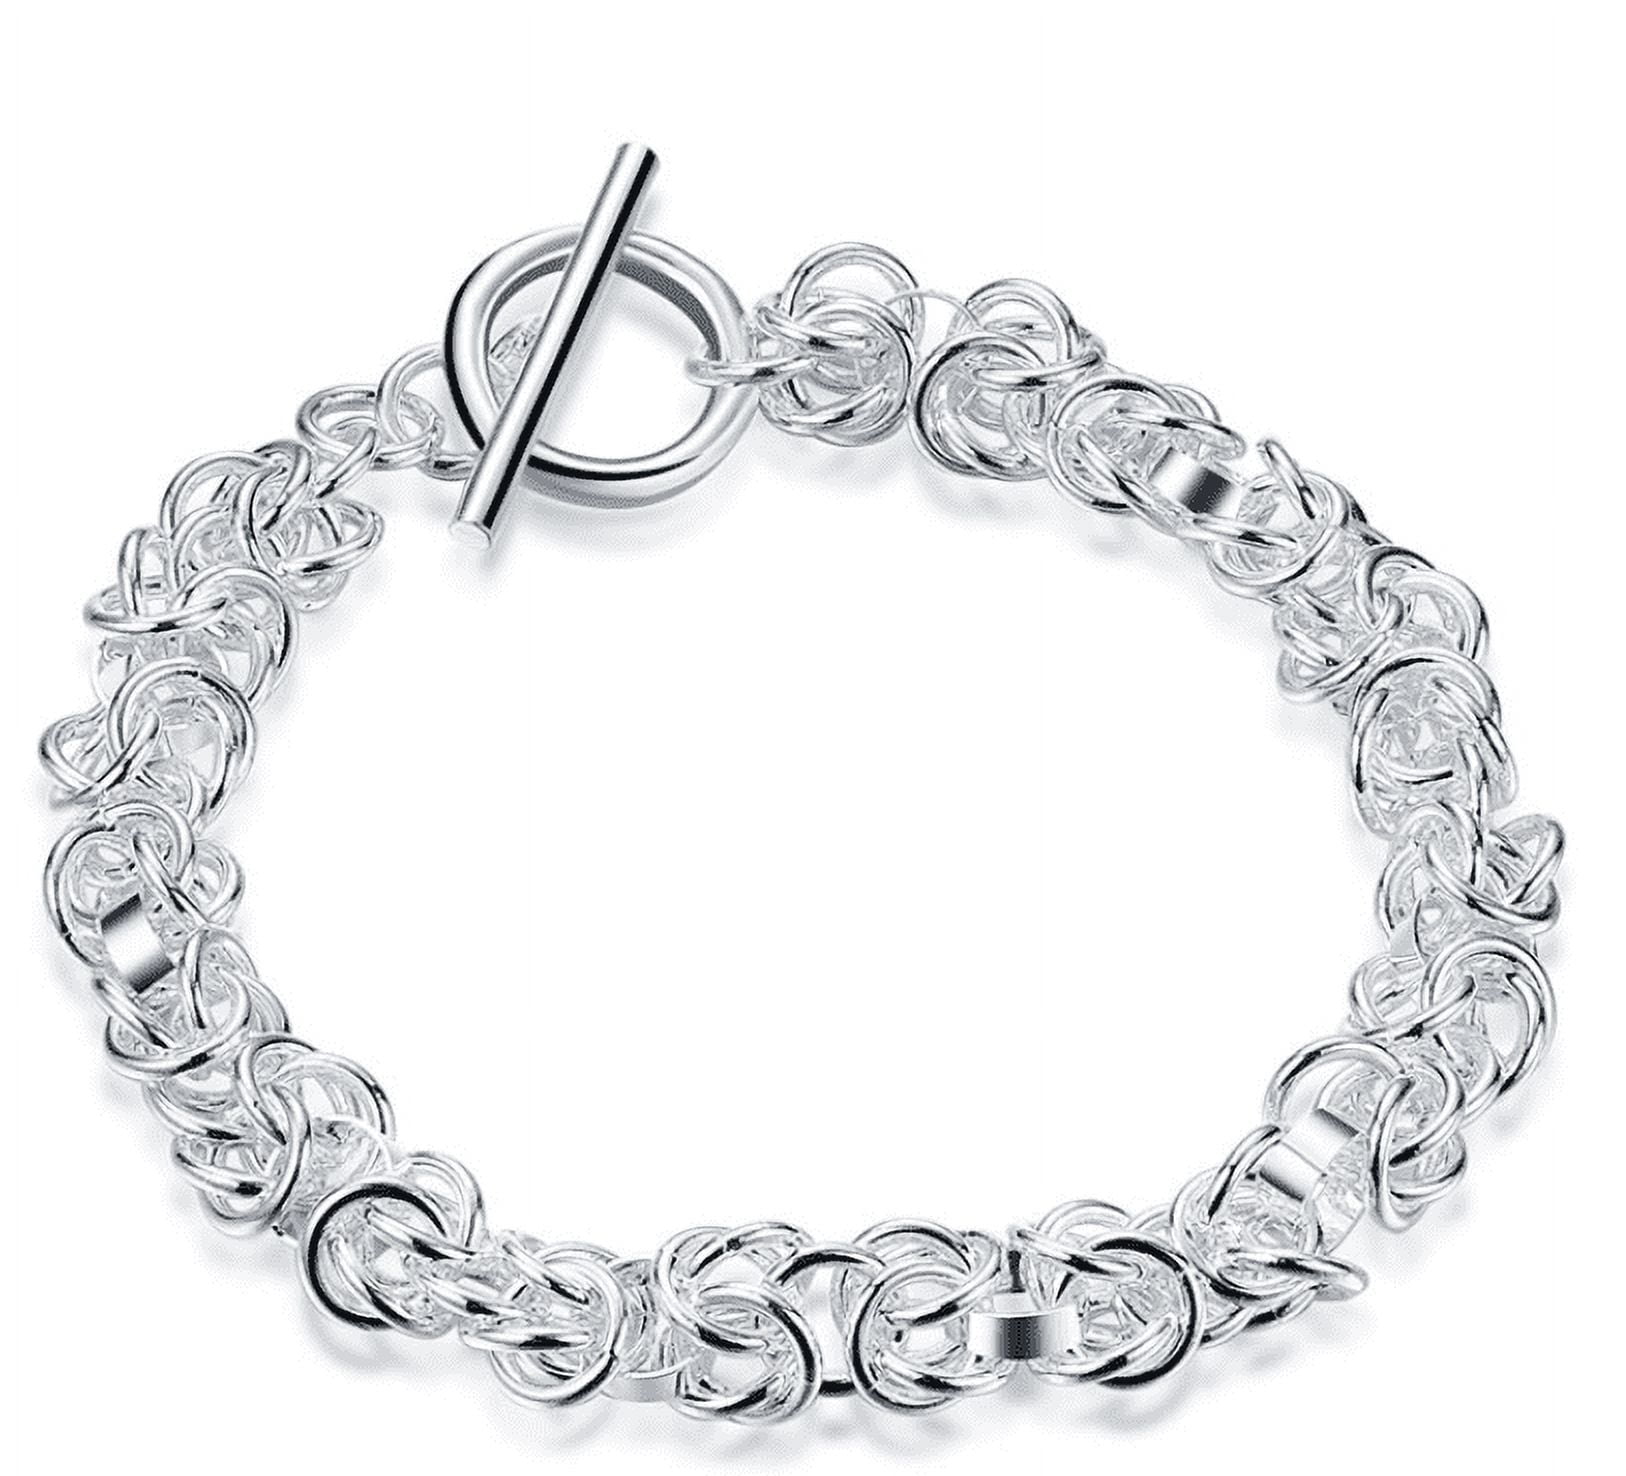 Knotted Links Sterling Silver Toggle Bracelet For Woman 